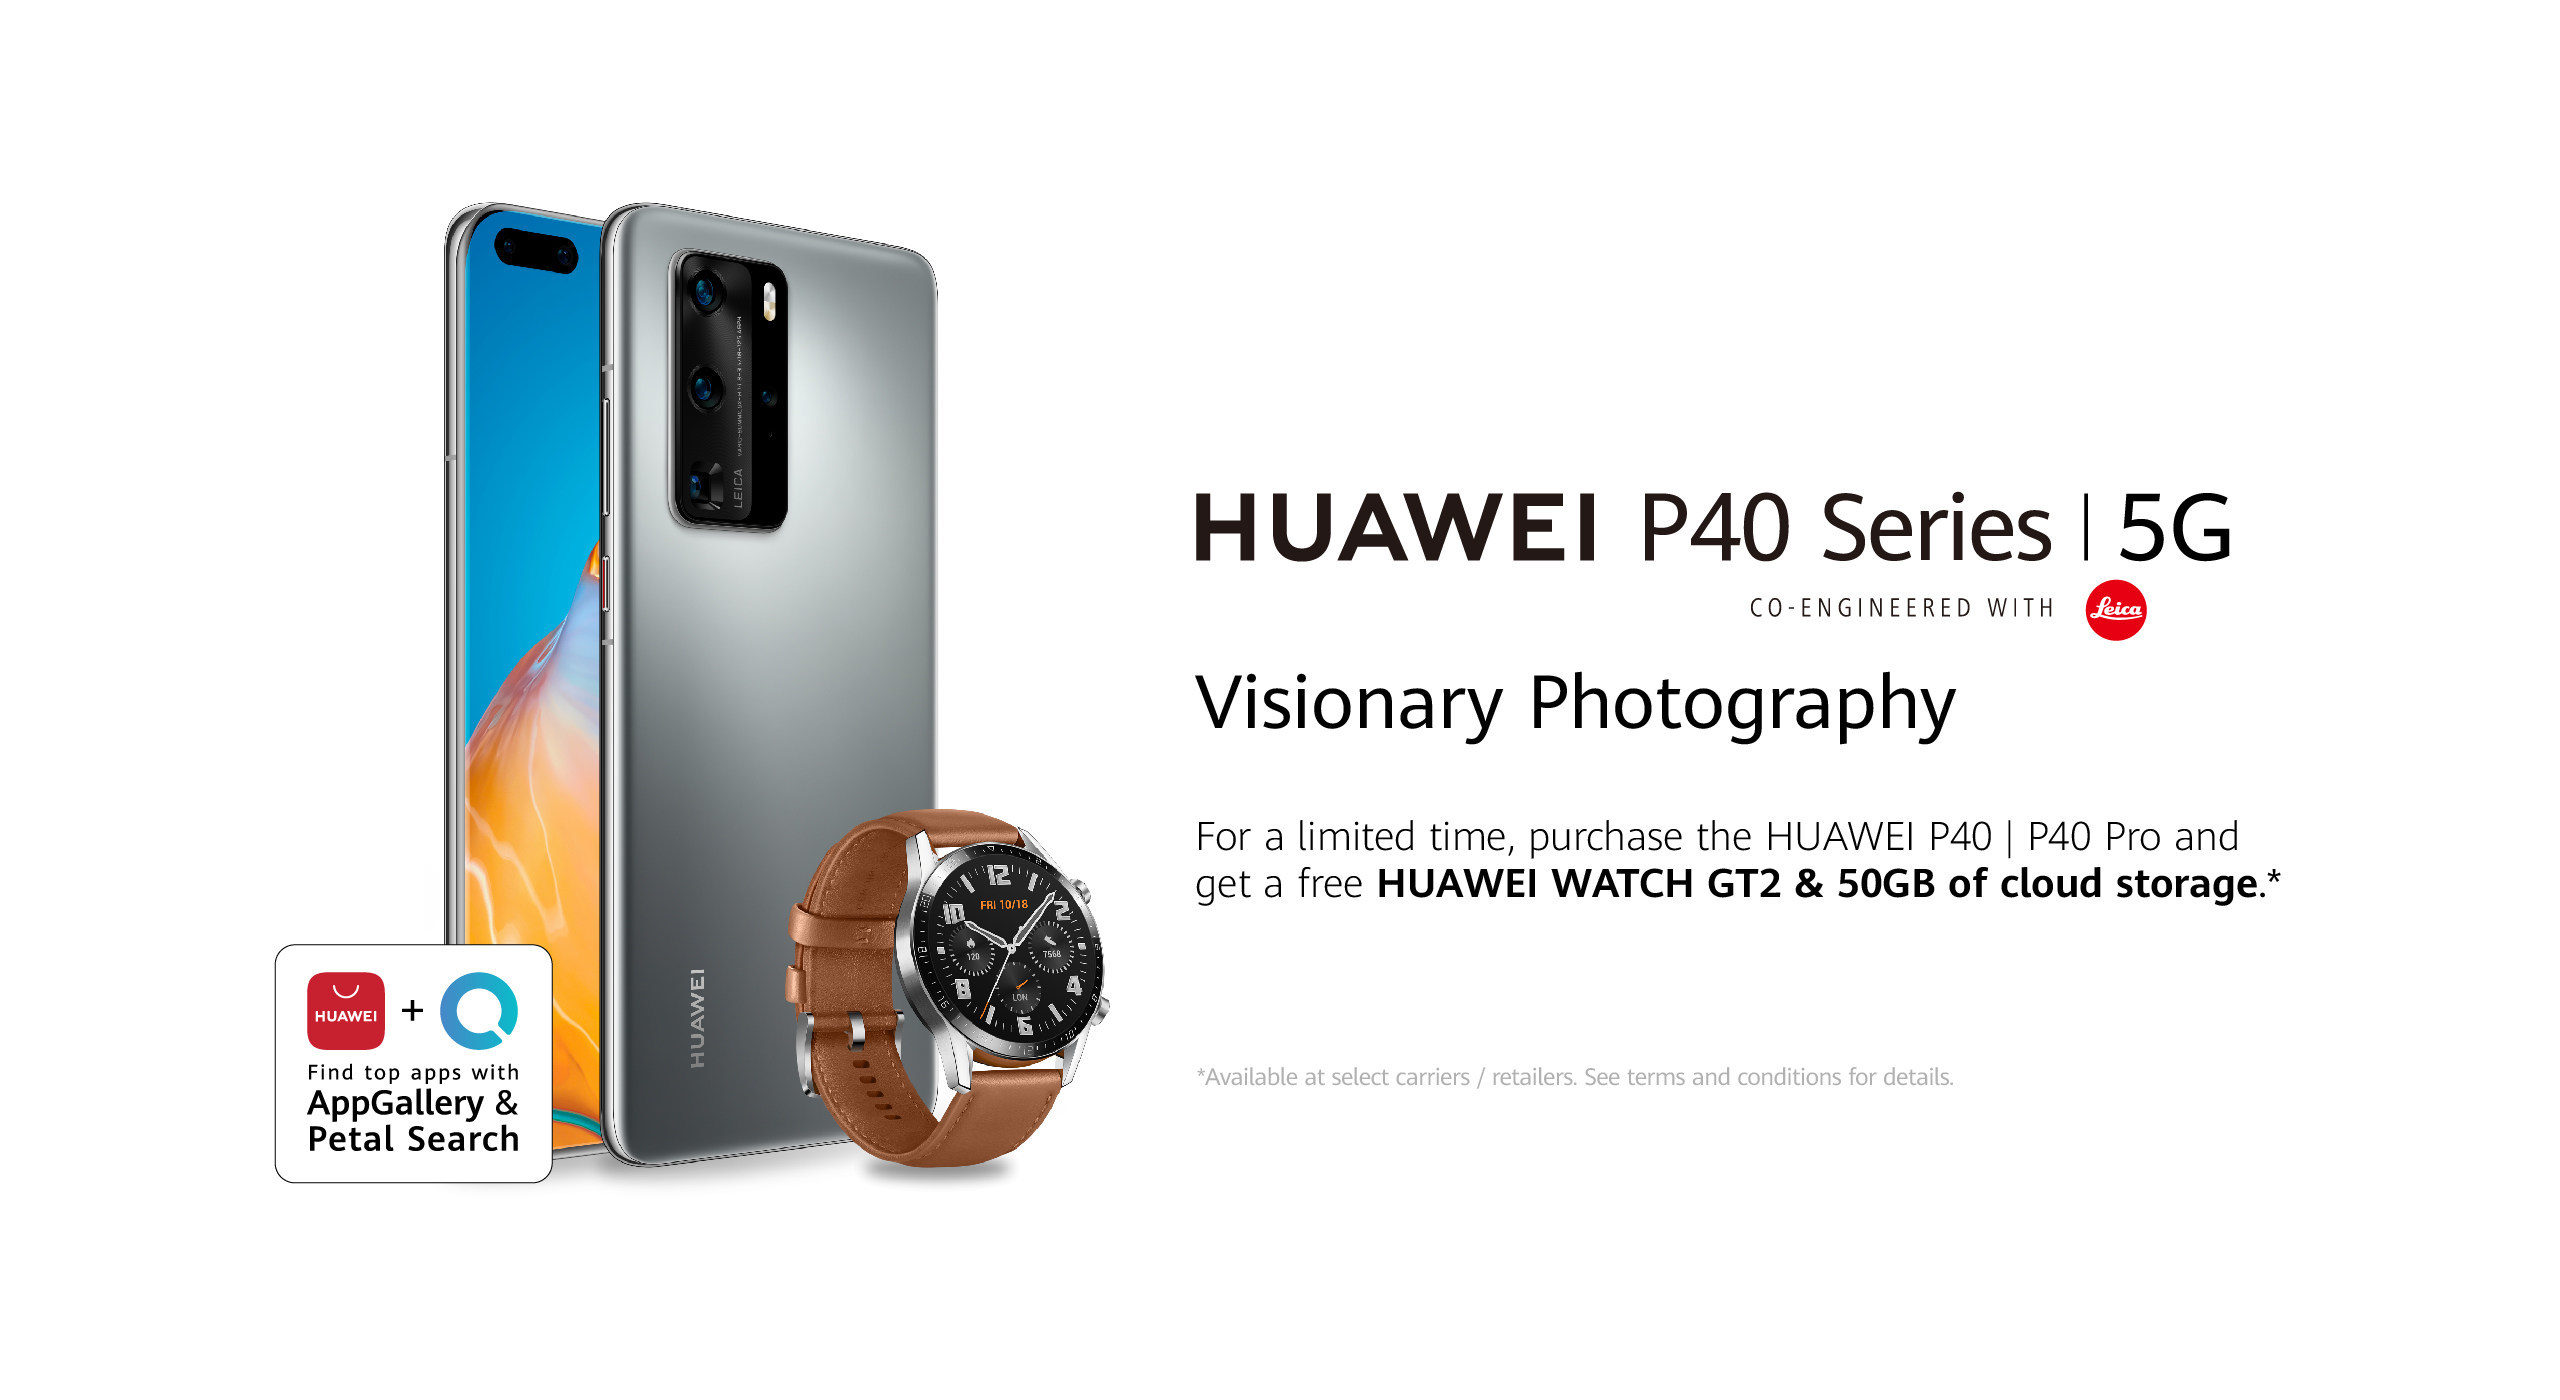 Huawei P40 Series 5g With World S Best Smartphone Camera And The New Huawei Appgallery And Petal Search Now Available In Canada - kobe w watch roblox